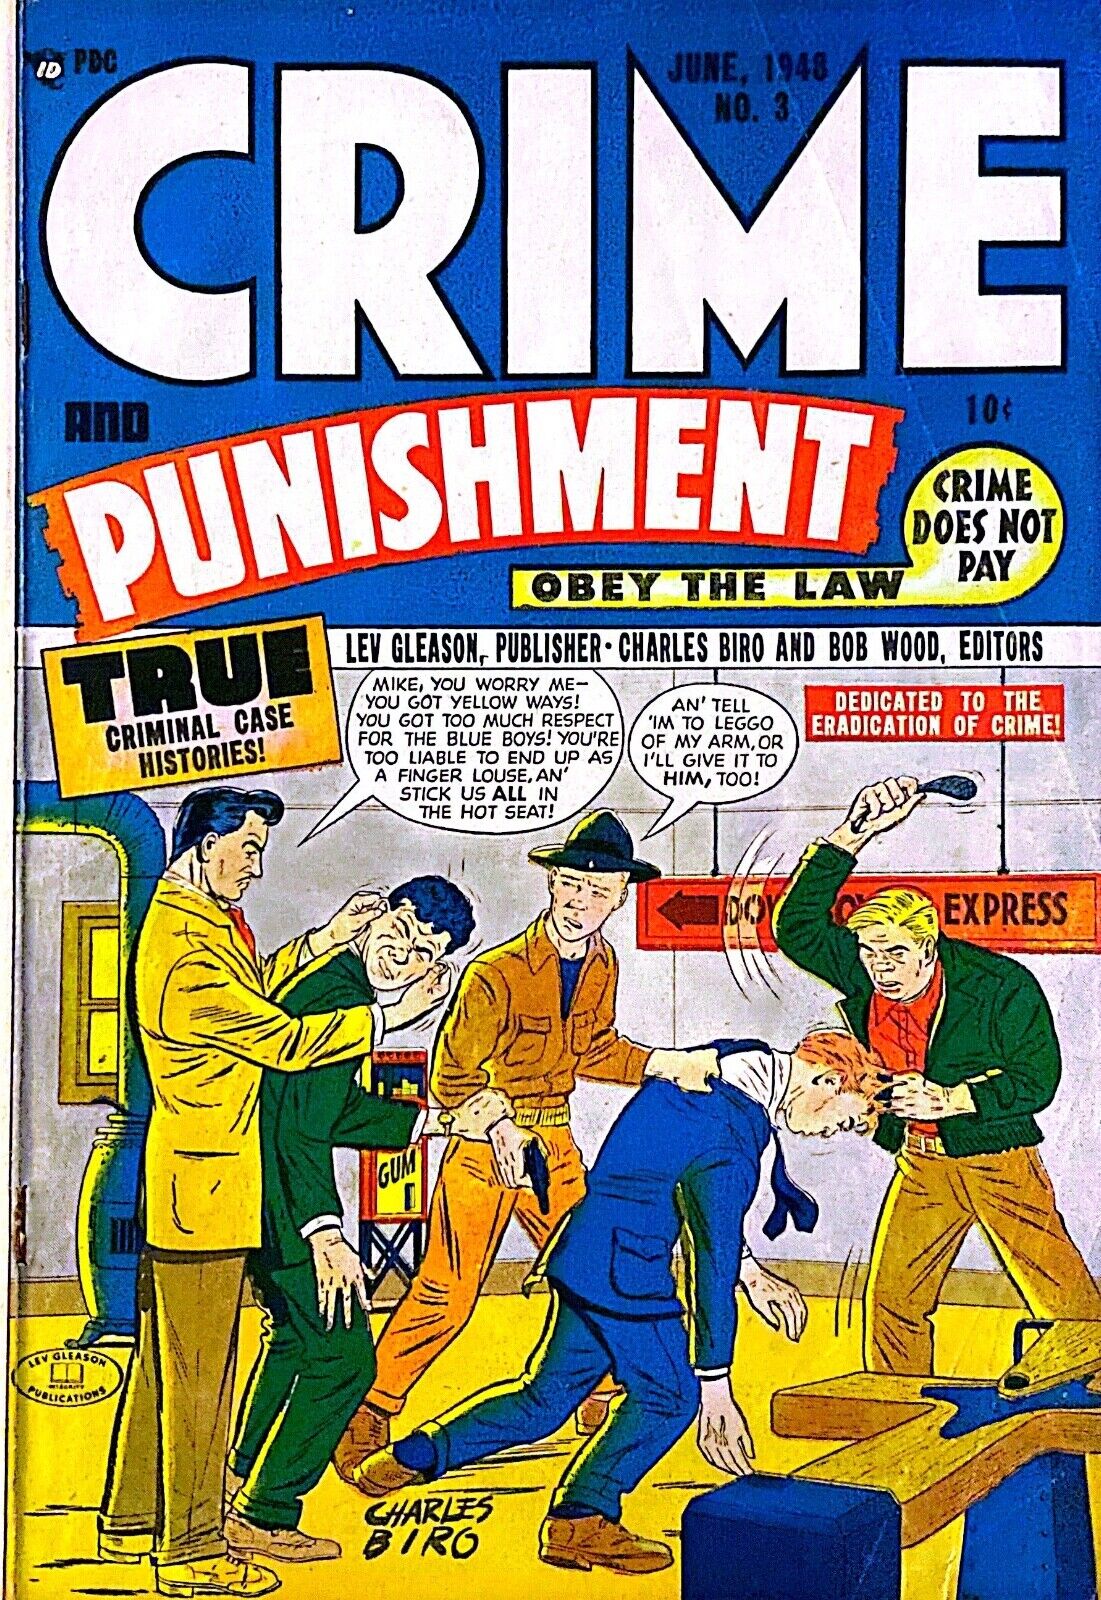 Crime and Punishment #3 by Lev Gleason (1948) - Good/Very good (3.0)